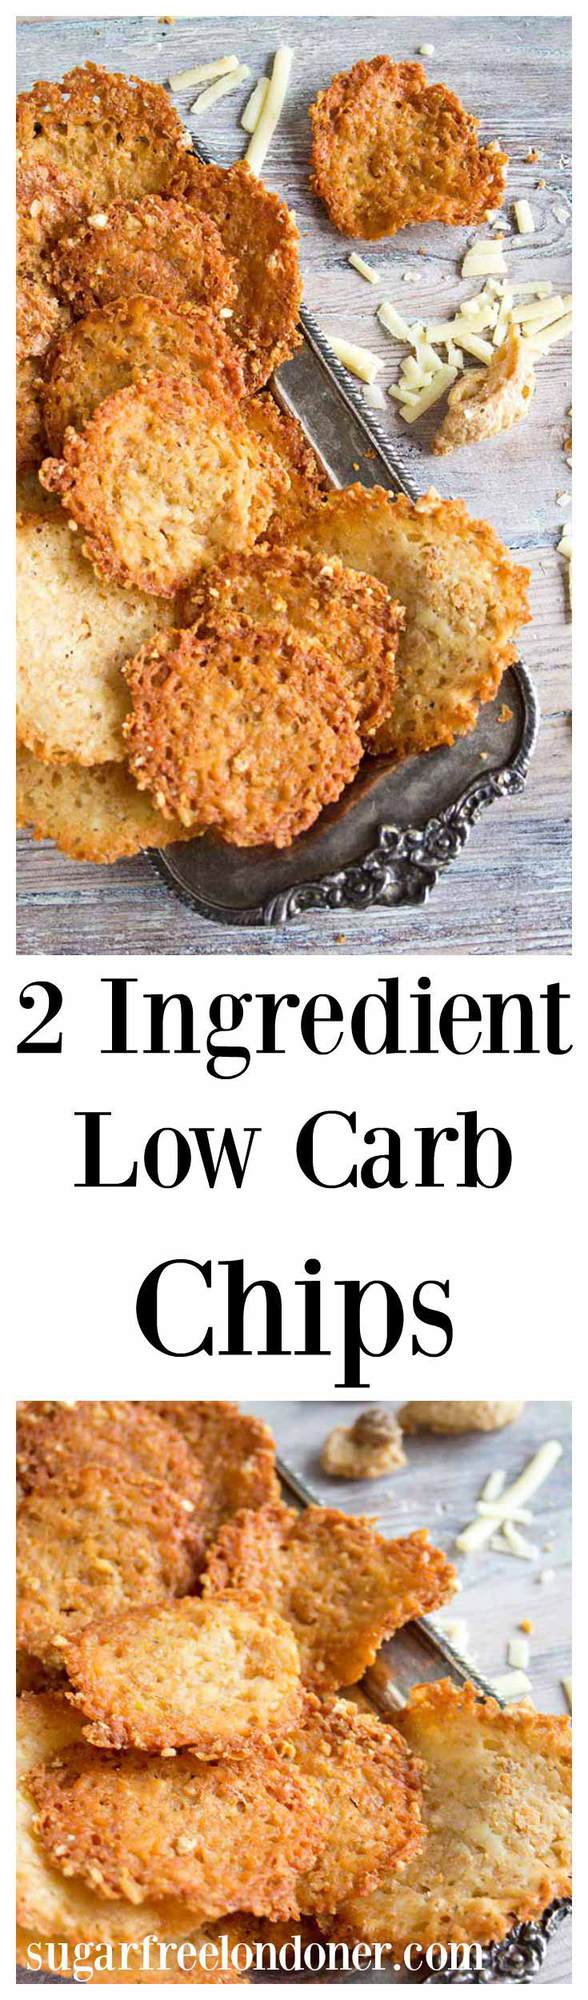 You only need 2 ingredients for these easy low carb chips! Crispy, cheesy and moreish, this flavoursome LCHF snack is ready in minutes. 